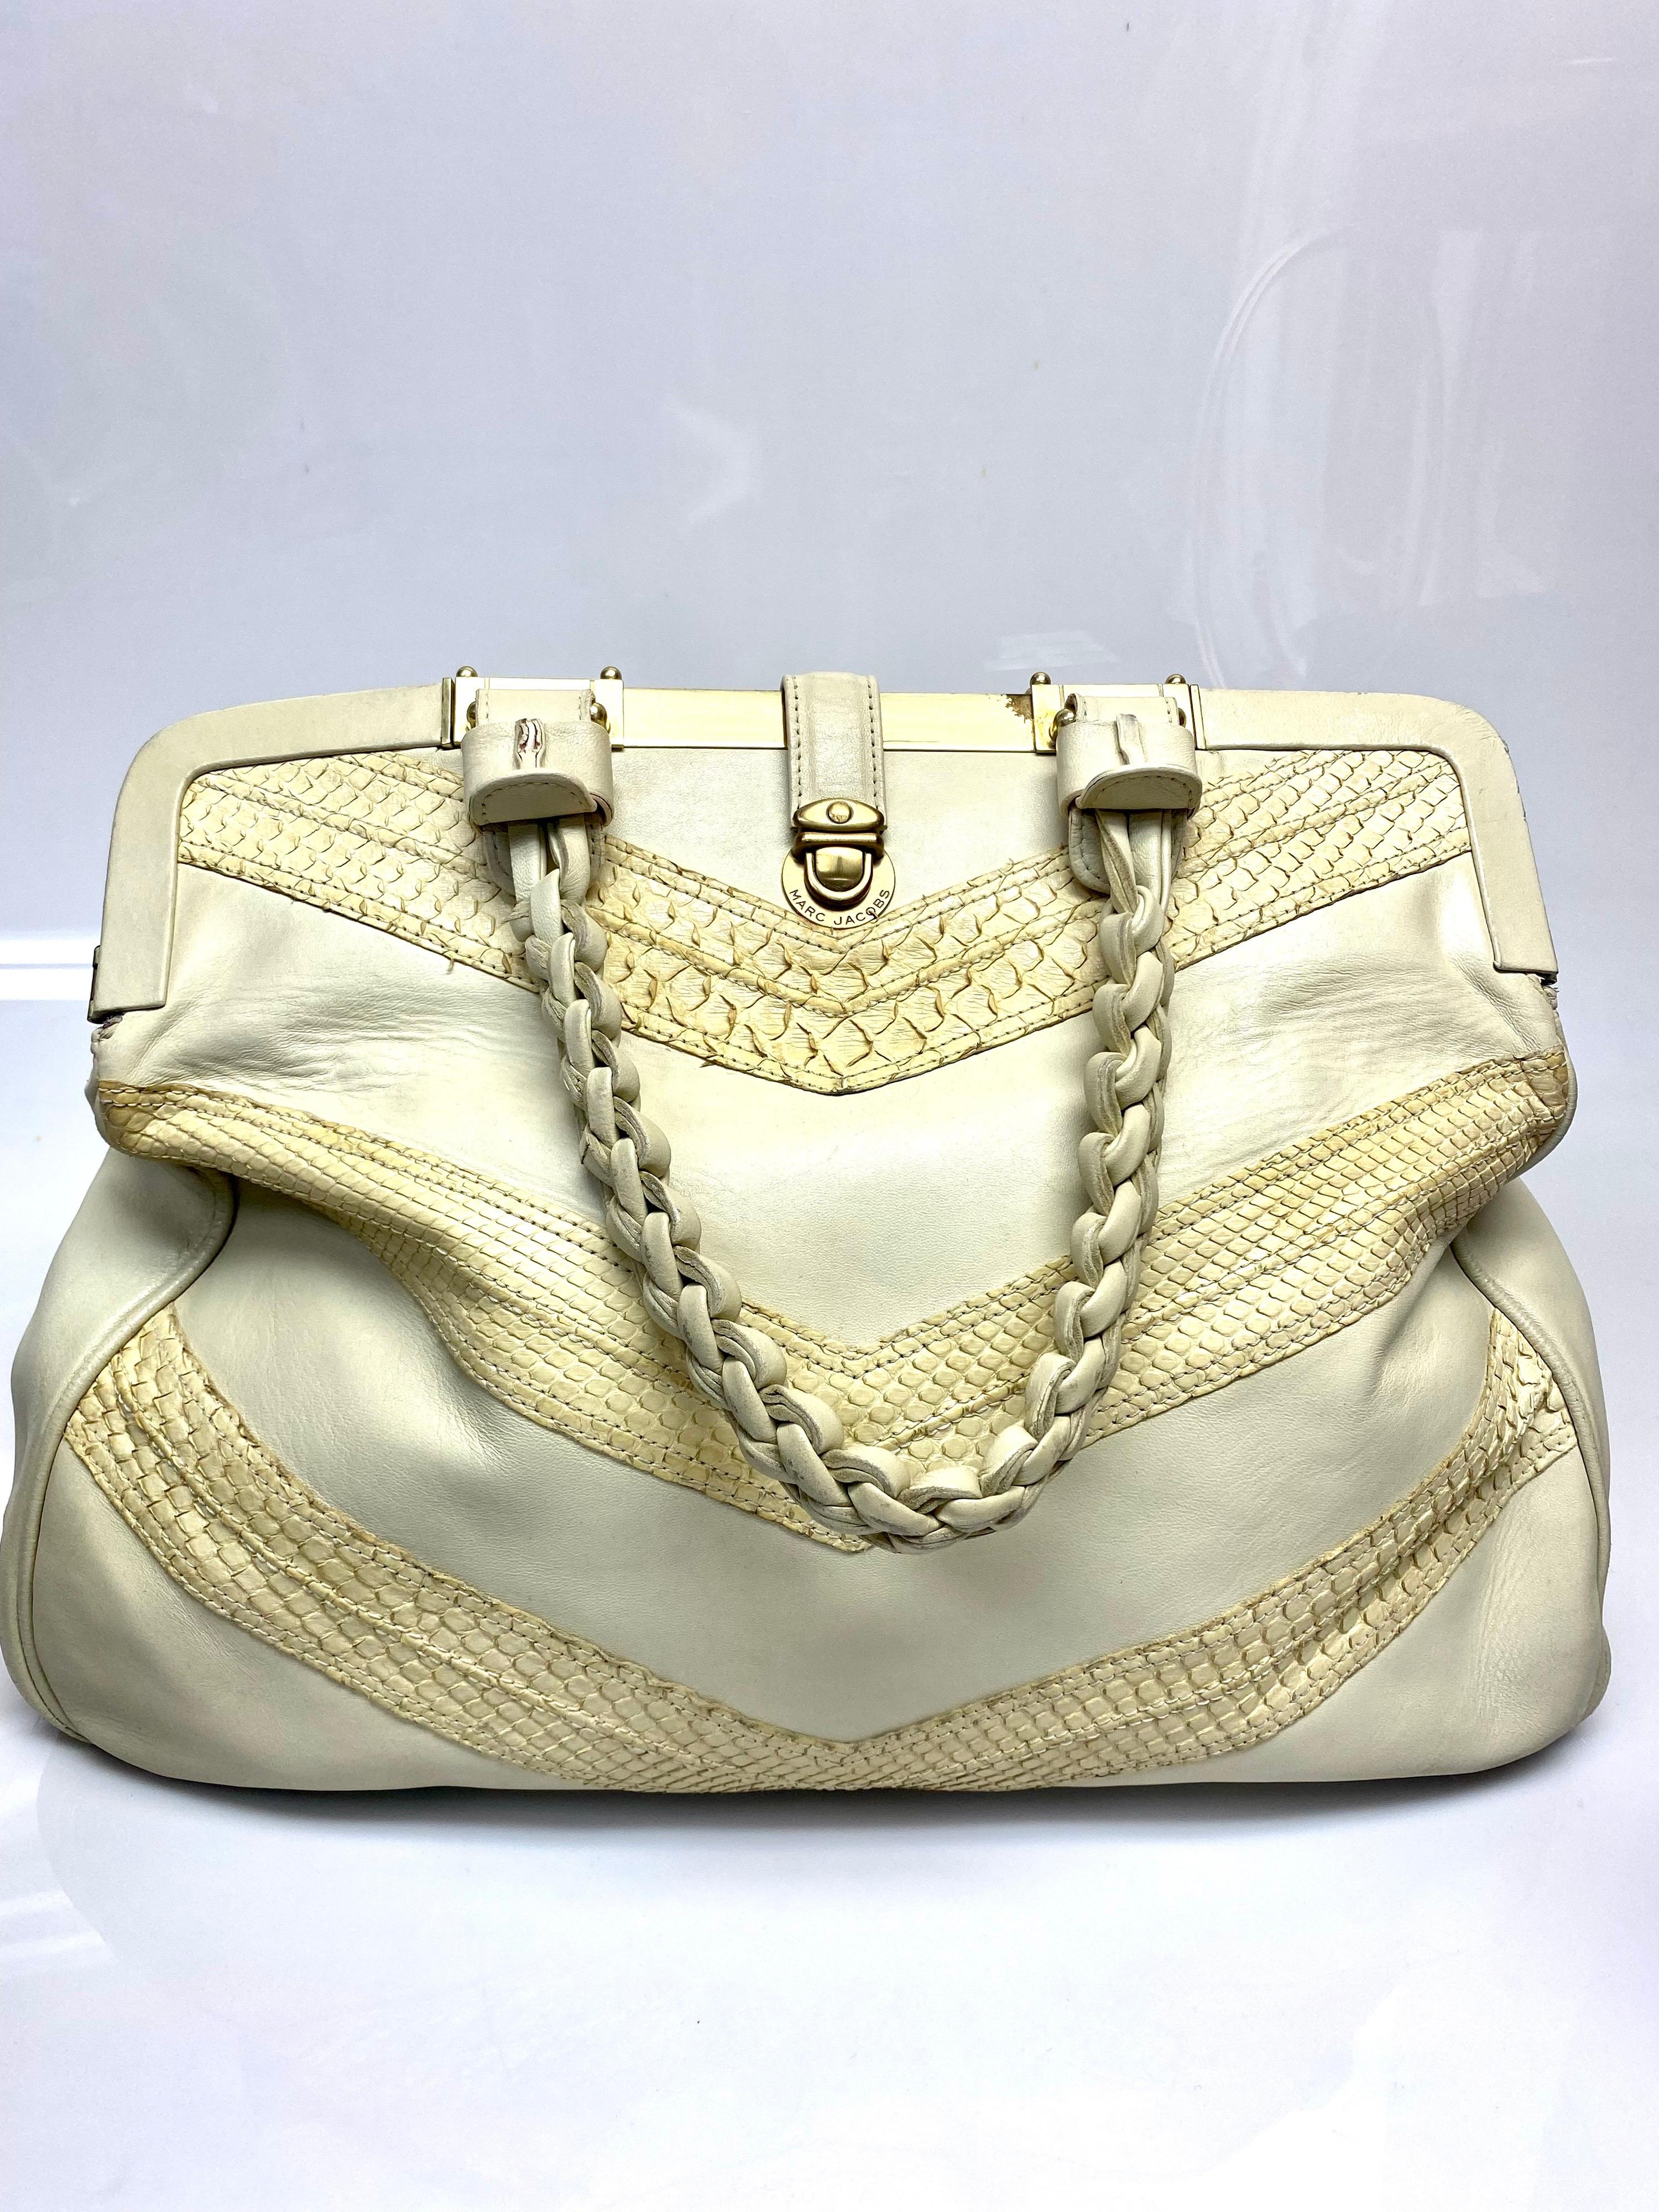 Another of Marc Jacobs beautiful handbag designs, this Beige Python leather beauty. The inside is lined in maroon and the bag features gold hardware throughout with one zipped pocket inside. Item is in good condition with signs of wear throughout.